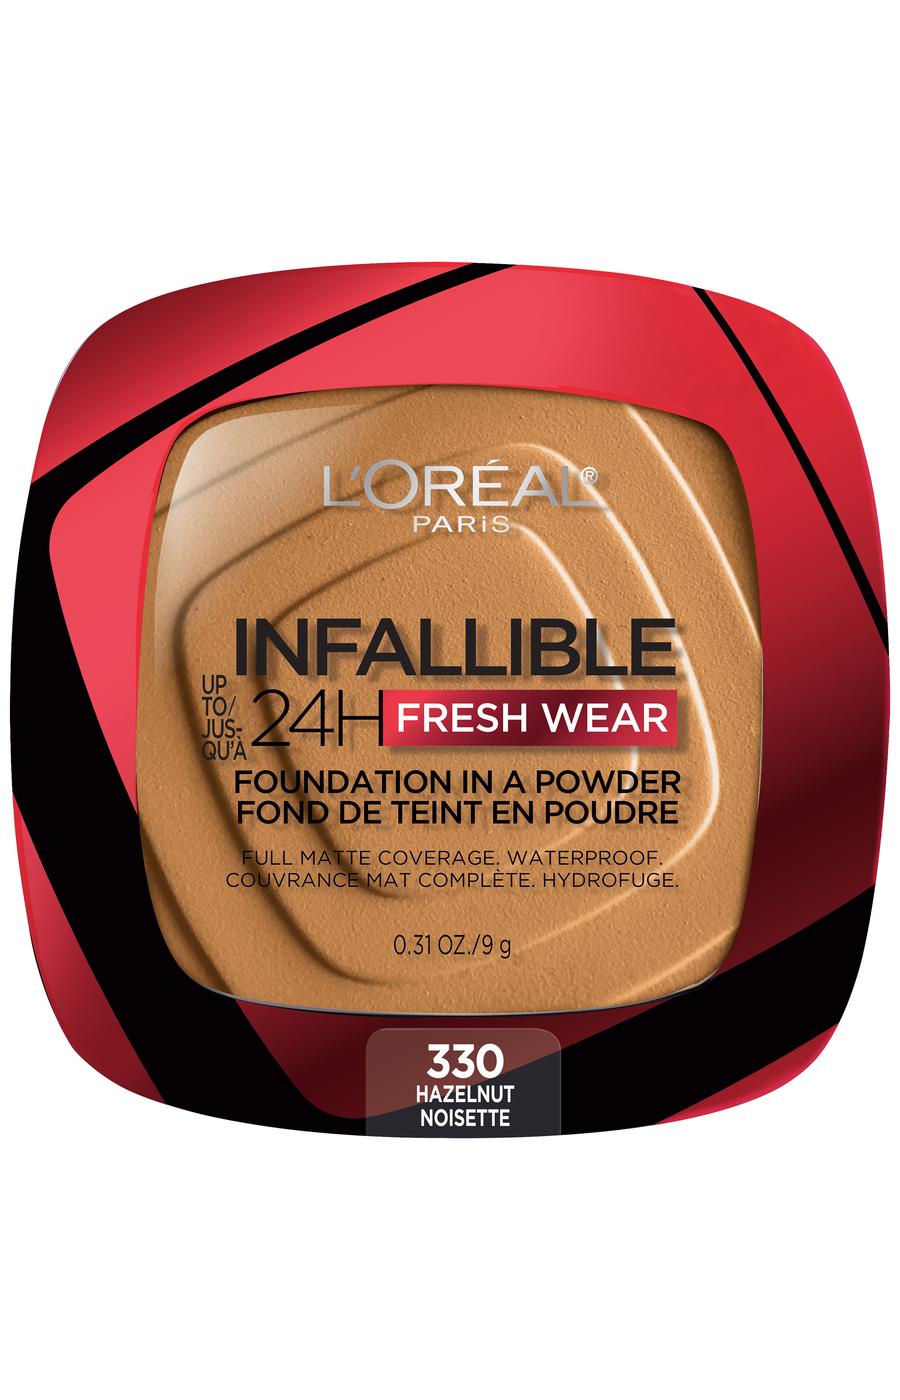 L'Oréal Paris Infallible Up to 24H Fresh Wear Foundation in a Powder Hazelnut; image 1 of 3